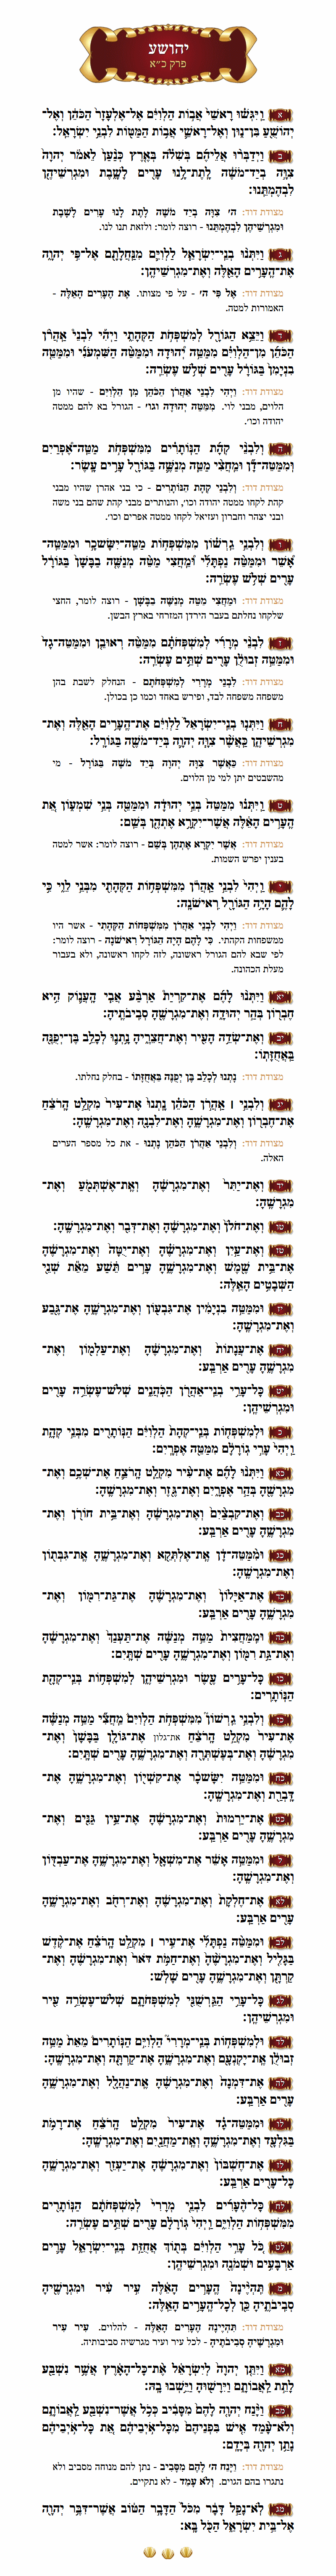 Sefer Yehoshua Chapter 21 with commentary